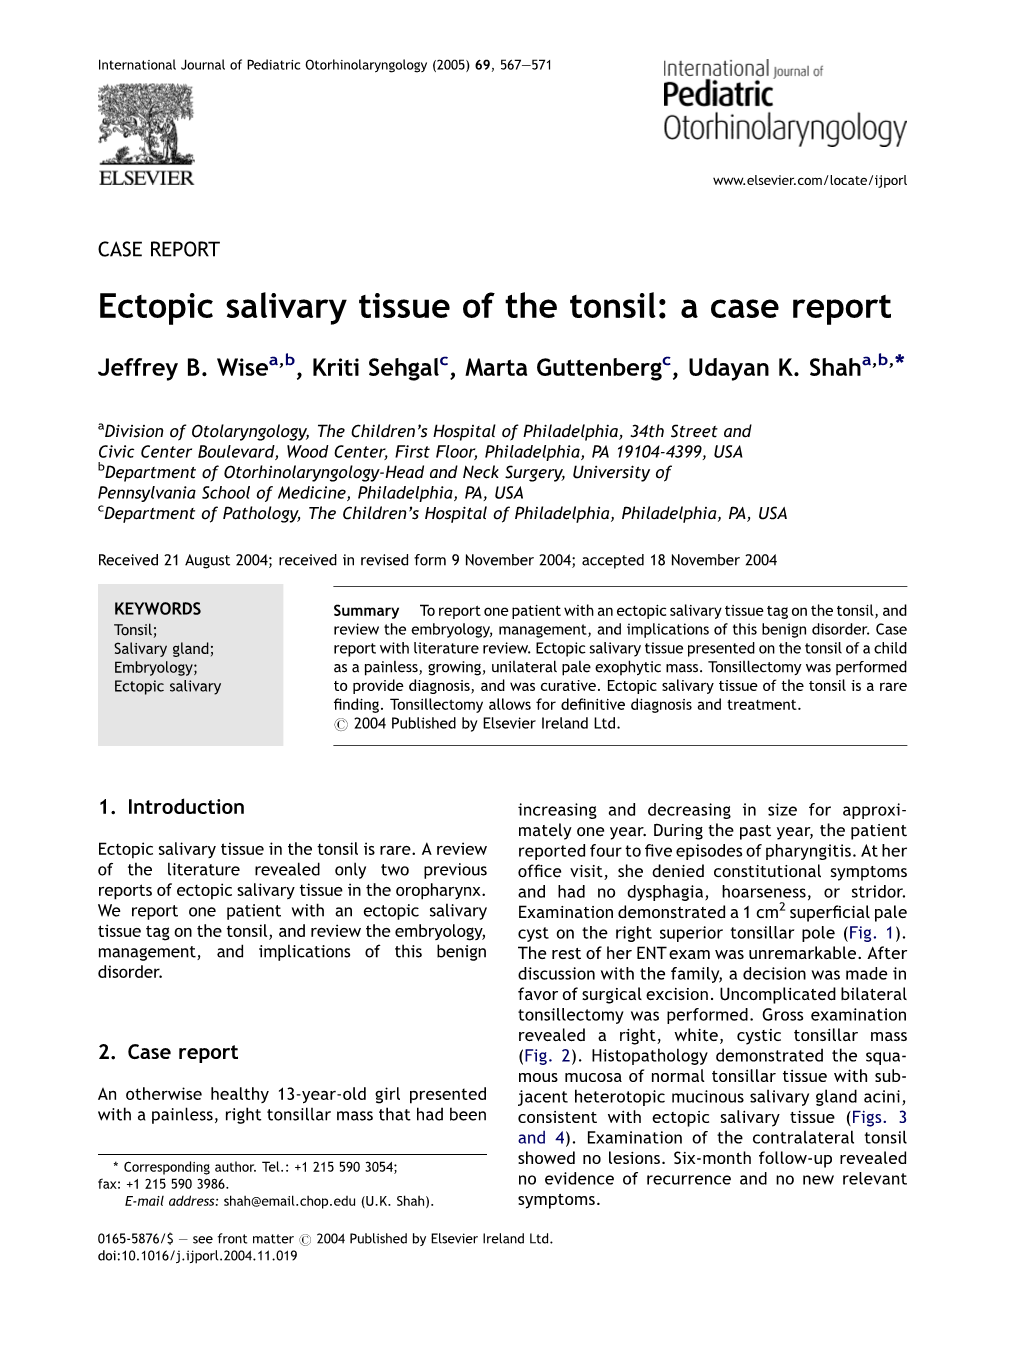 Ectopic Salivary Tissue of the Tonsil: a Case Report